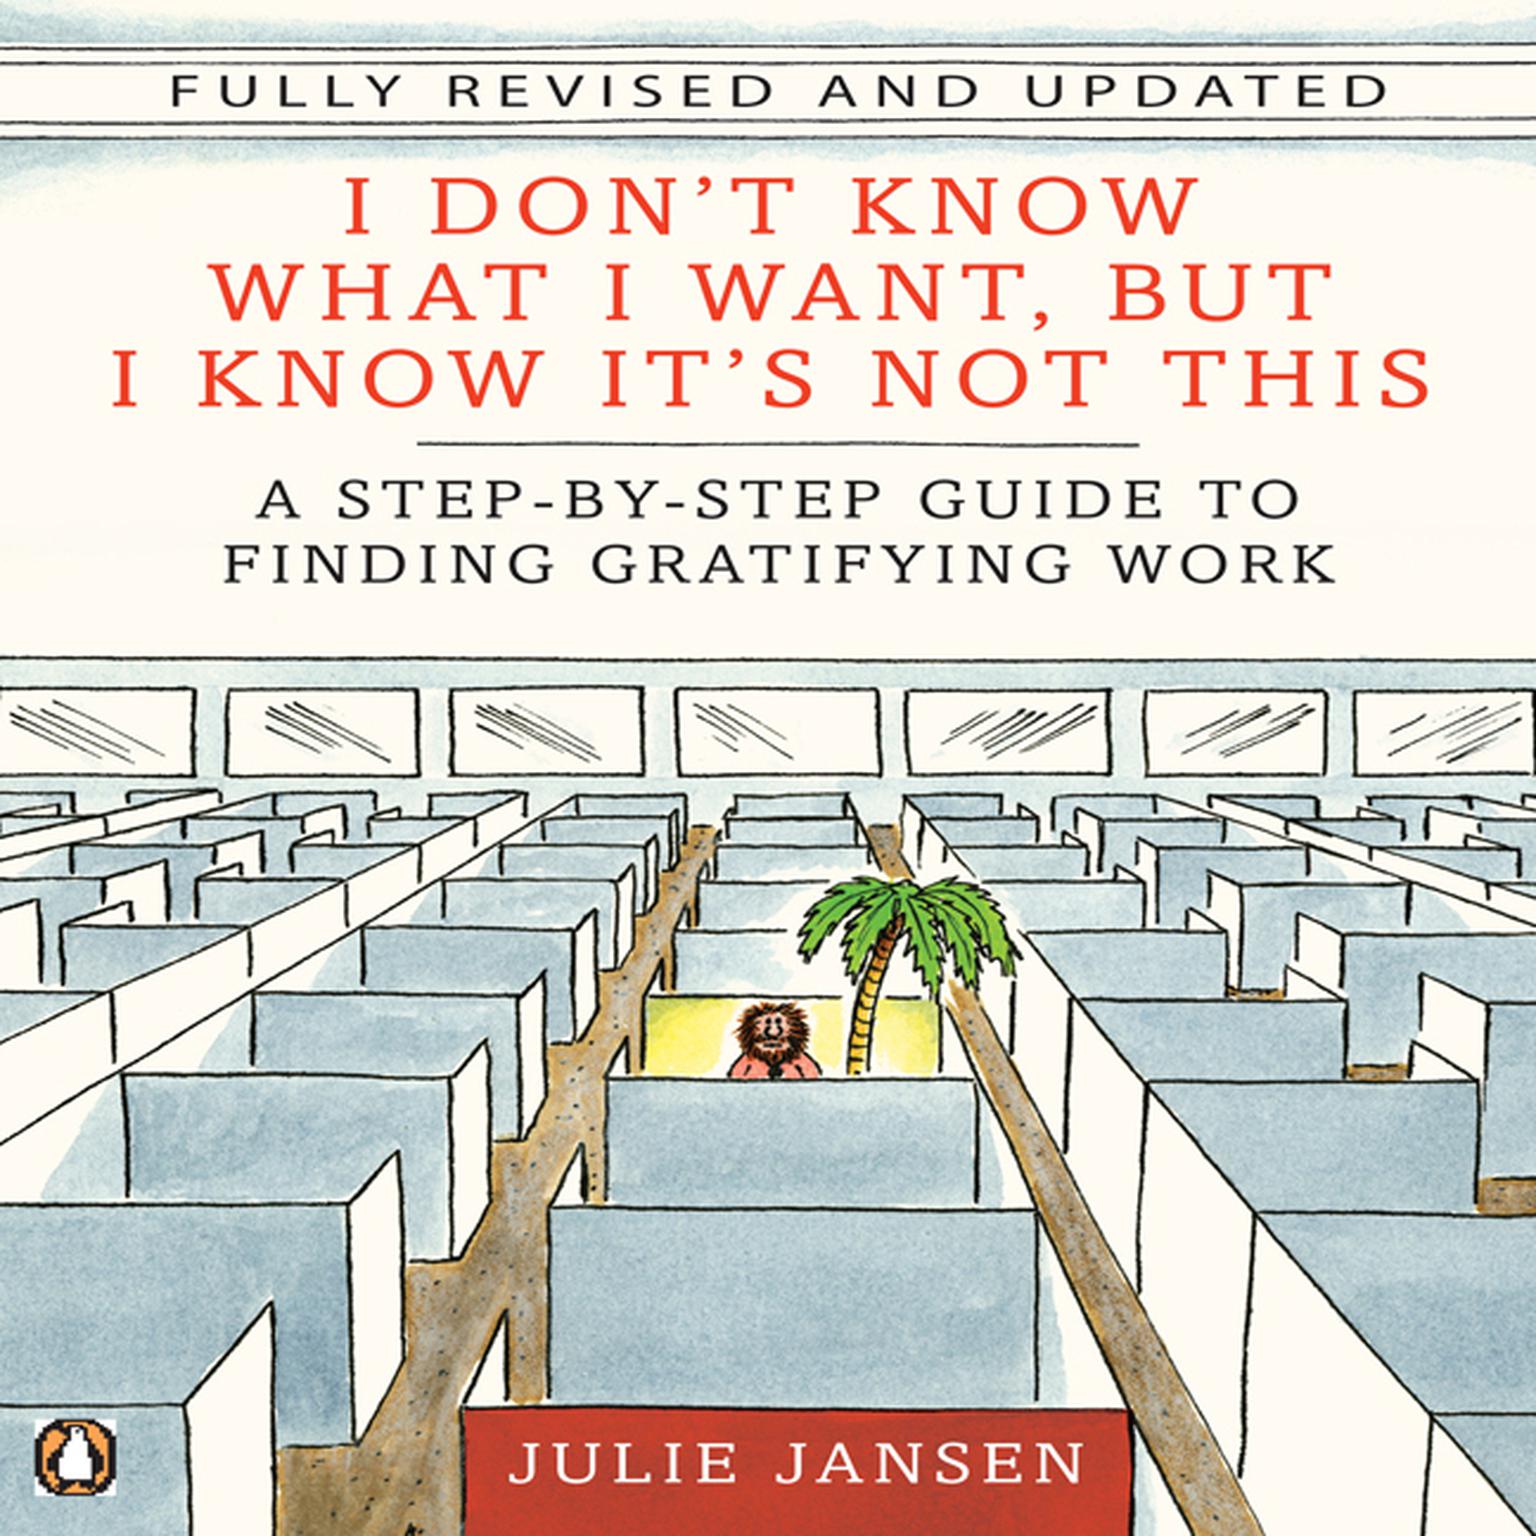 I Dont Know What I Want, But I Know Its Not This: A Step-by-Step Guide to Finding Gratifying Work Audiobook, by Julie Jansen